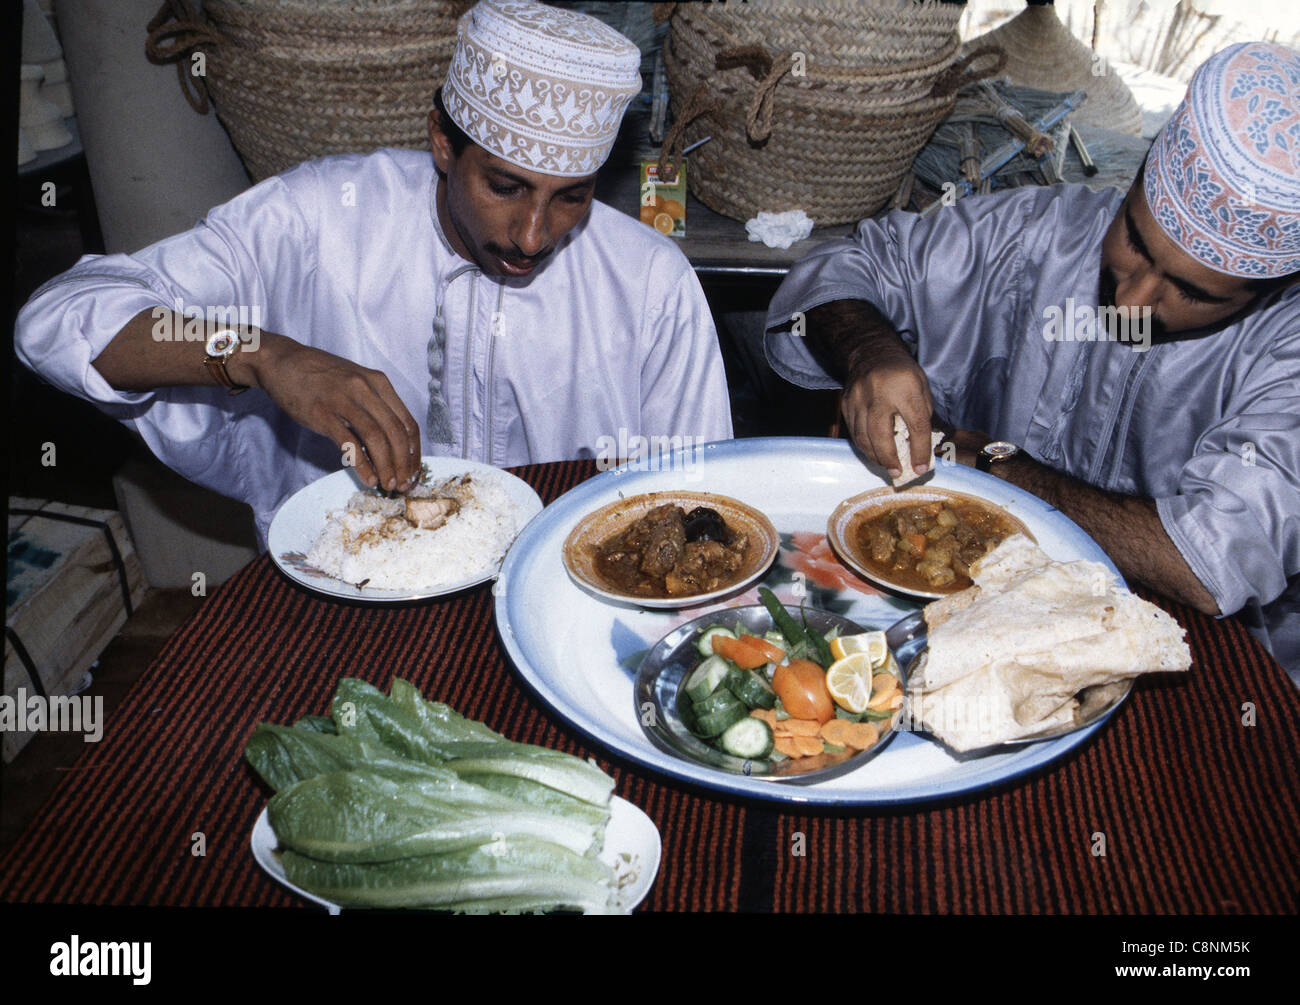 Two Muslim men eat using only the right hand to select portions of food, Oman Stock Photo